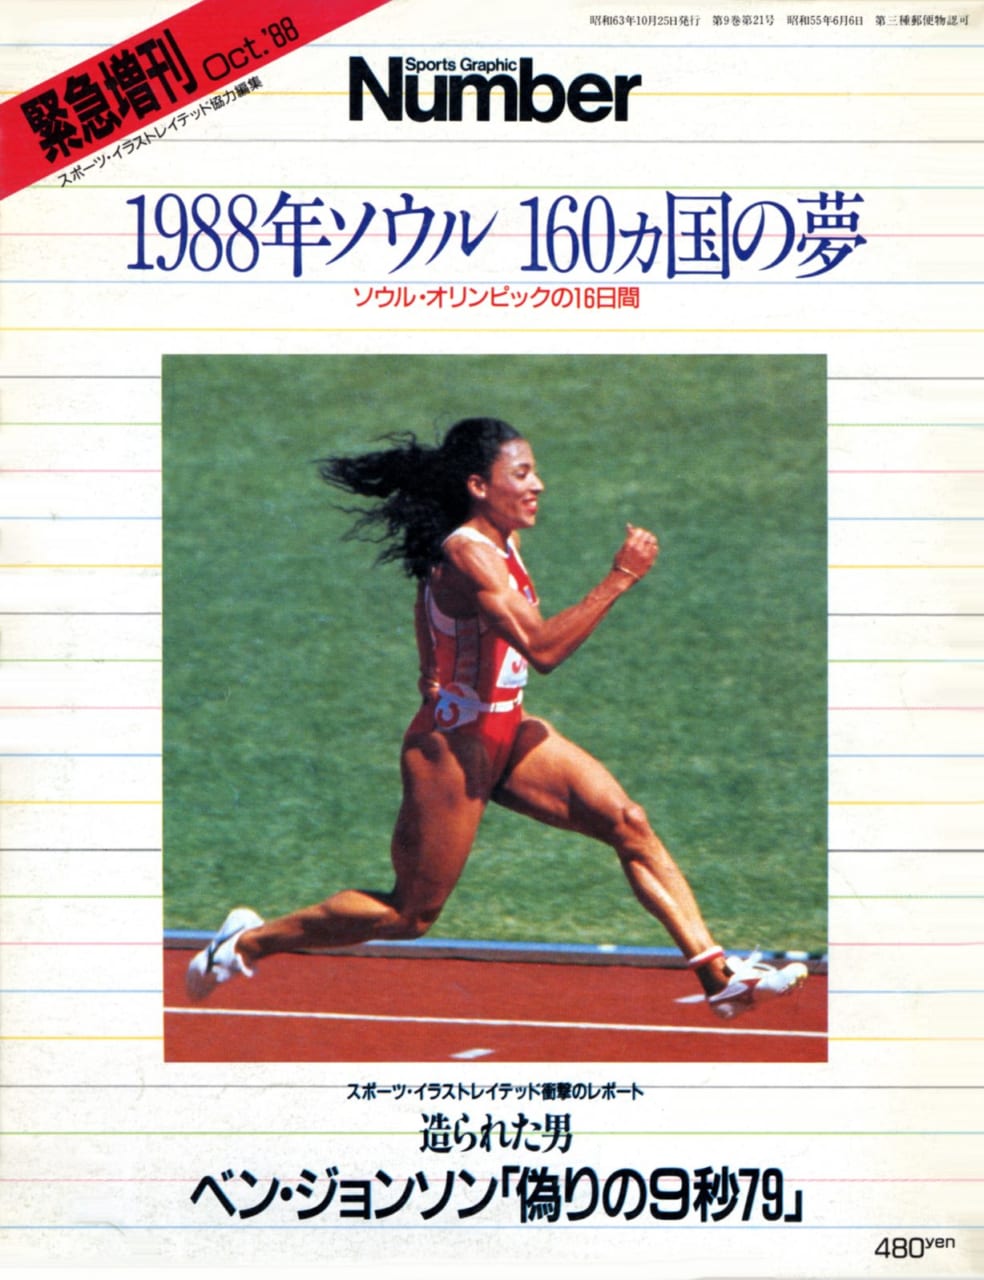 Sports Graphic Number
緊急増刊 October 1988
1988年10月5日発売
表紙撮影：Sports Illustrated